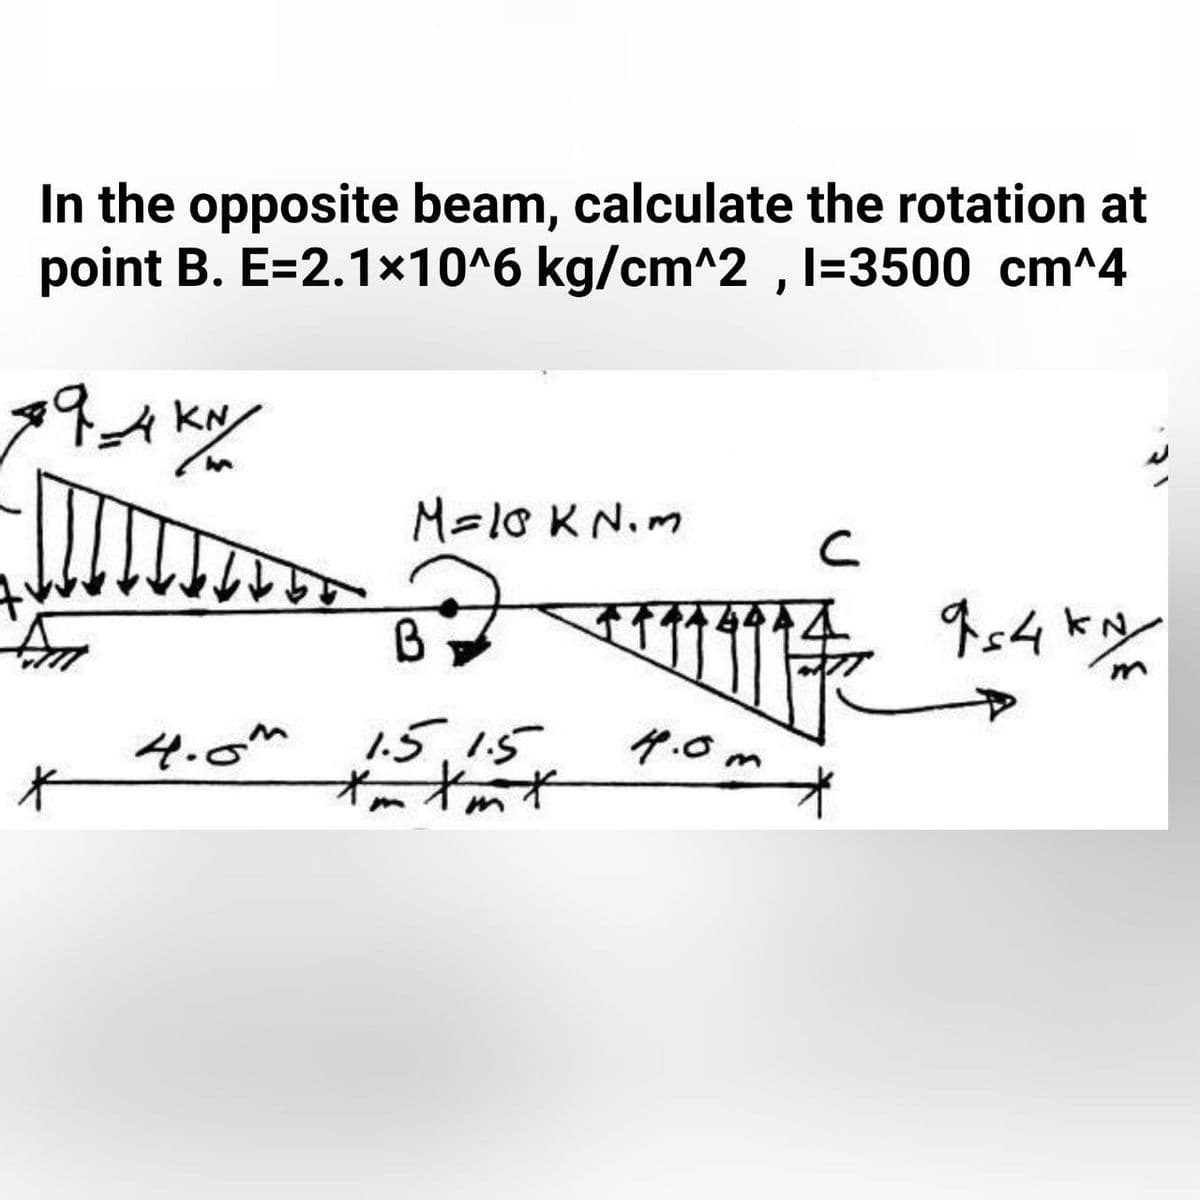 In the opposite beam, calculate the rotation at
point B. E=2.1x10^6 kg/cm^2 , I=3500 cm^4
M=10 KN.m
B
4.0m
1.5,15
4.0m
